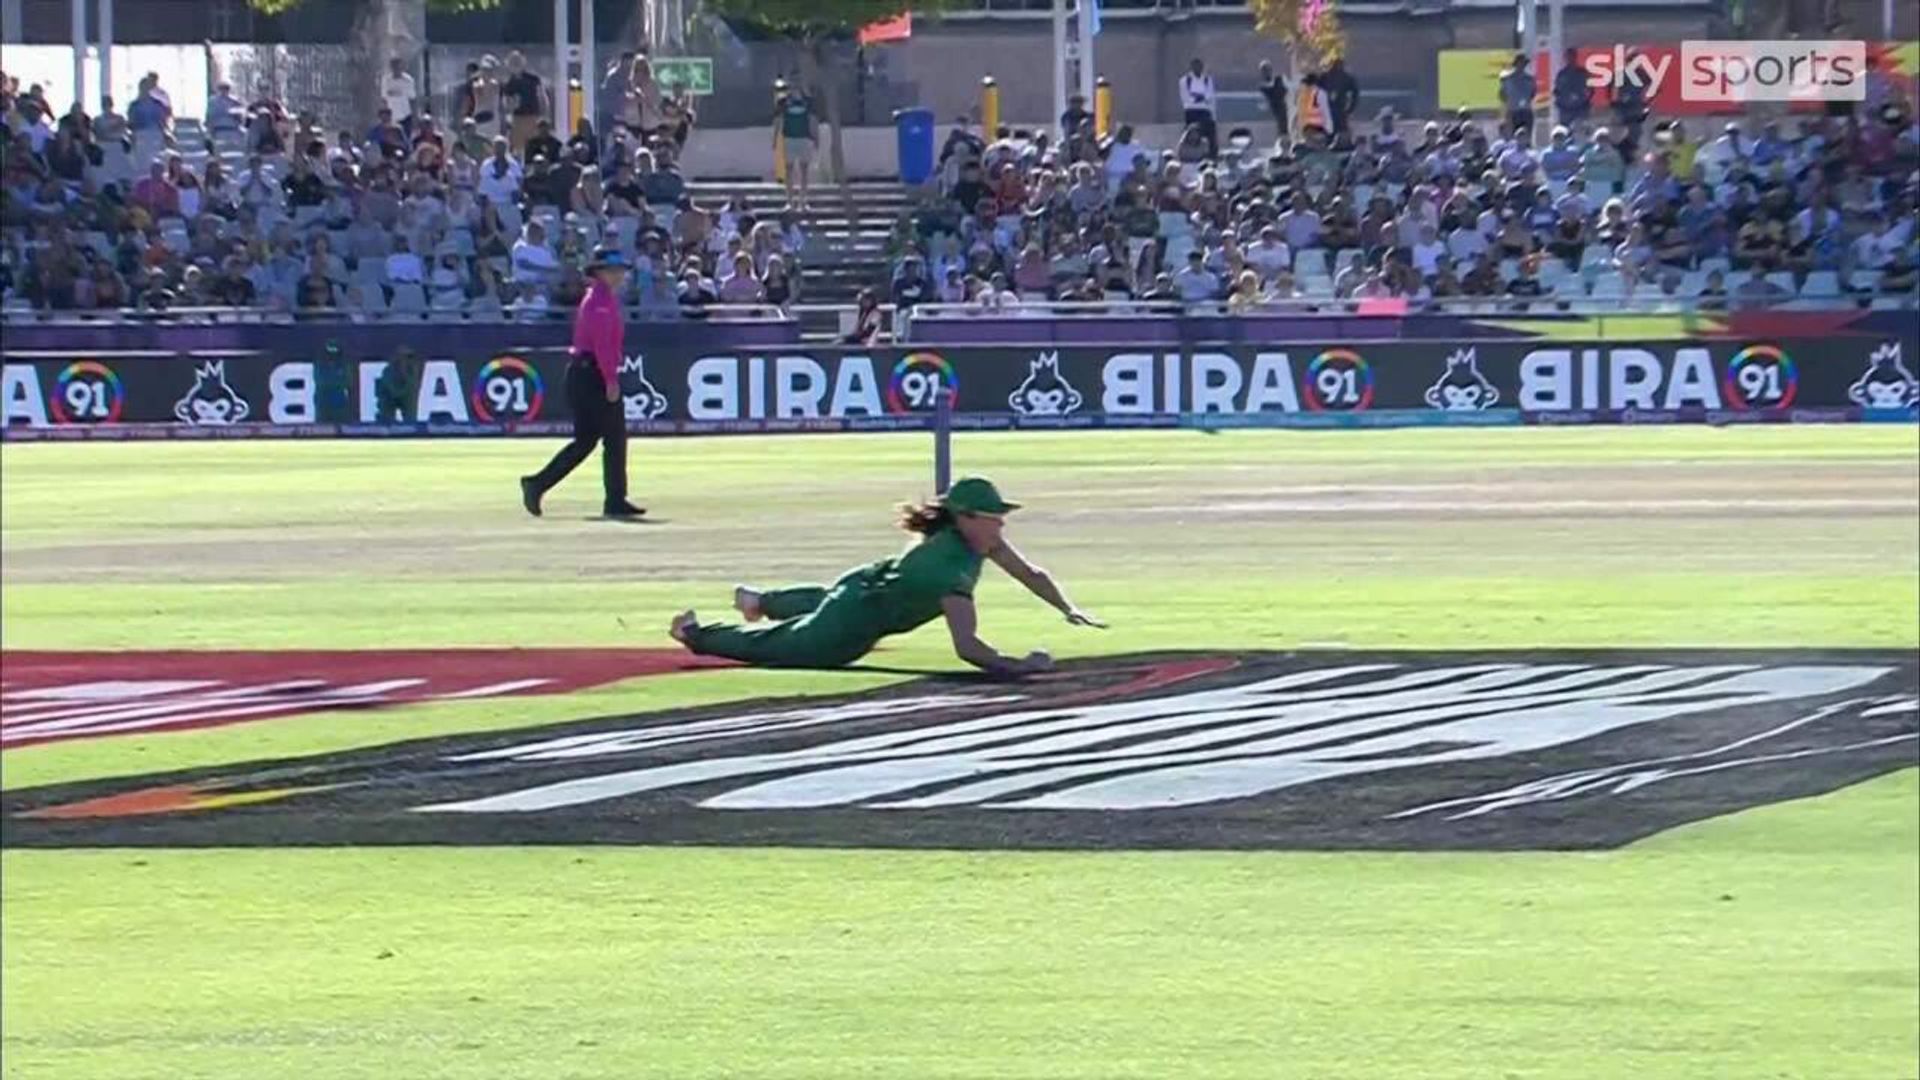 'This is magic!' - Brits produces the most outstanding one-handed catch